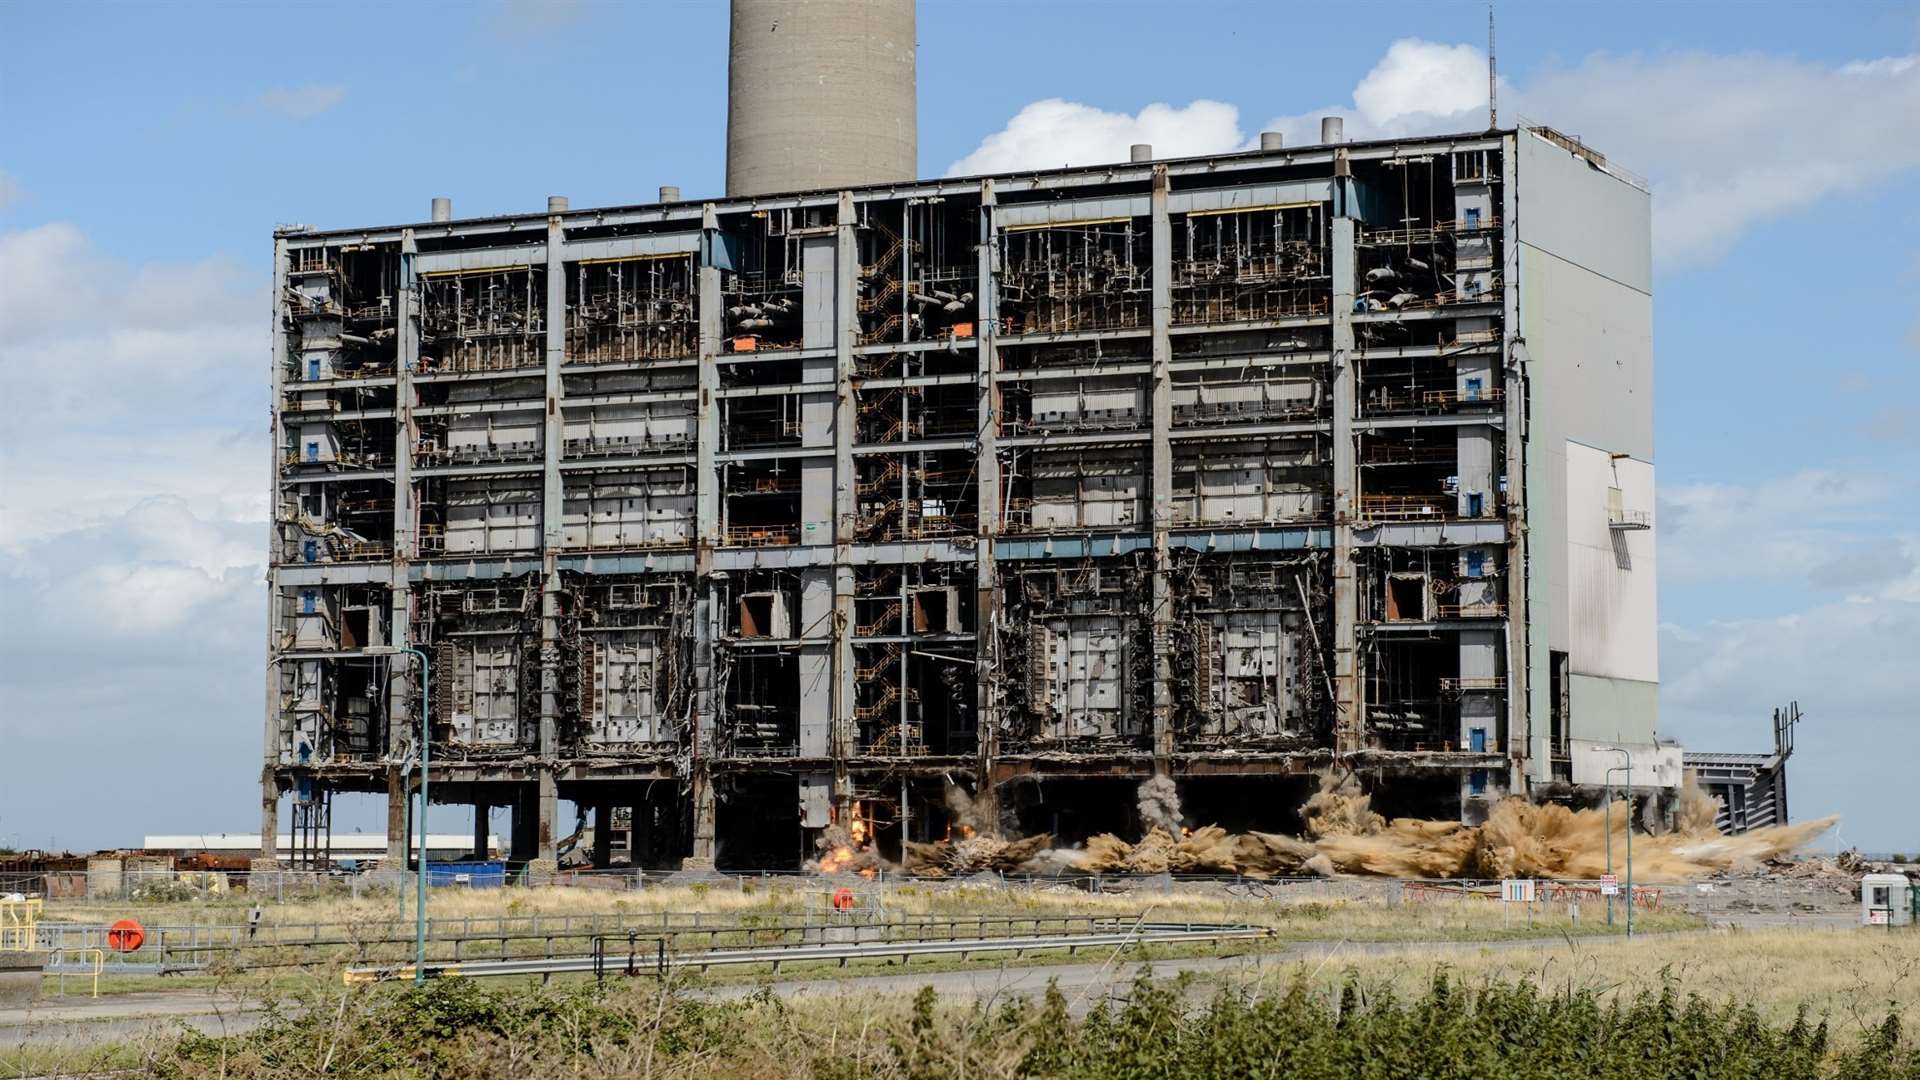 The demolition of the boiler houses at Kingsnorth power station in July, carried out by Brown and Mason